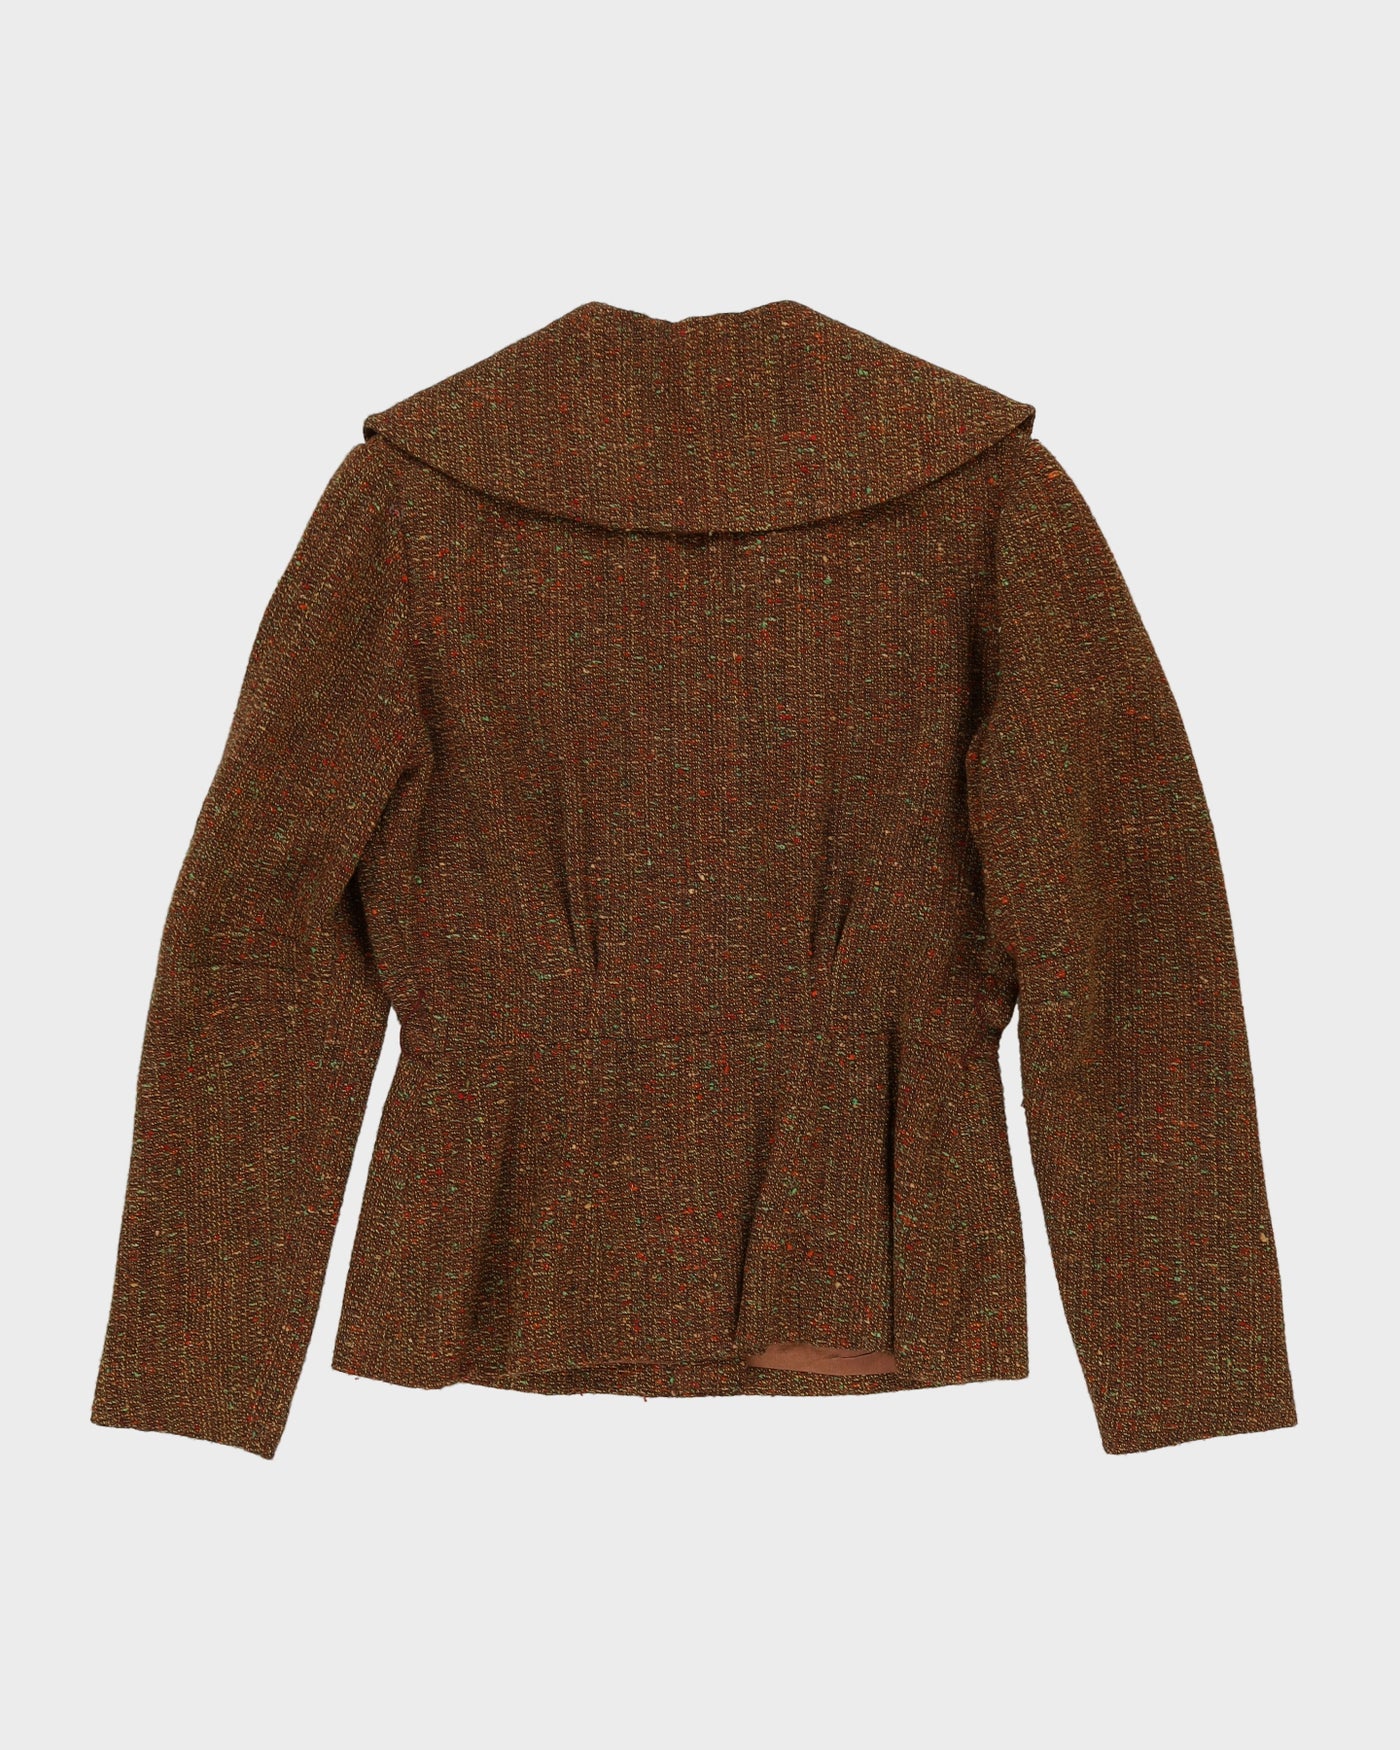 1940s-50s Brown And Green Wool Fitted Jacket - M